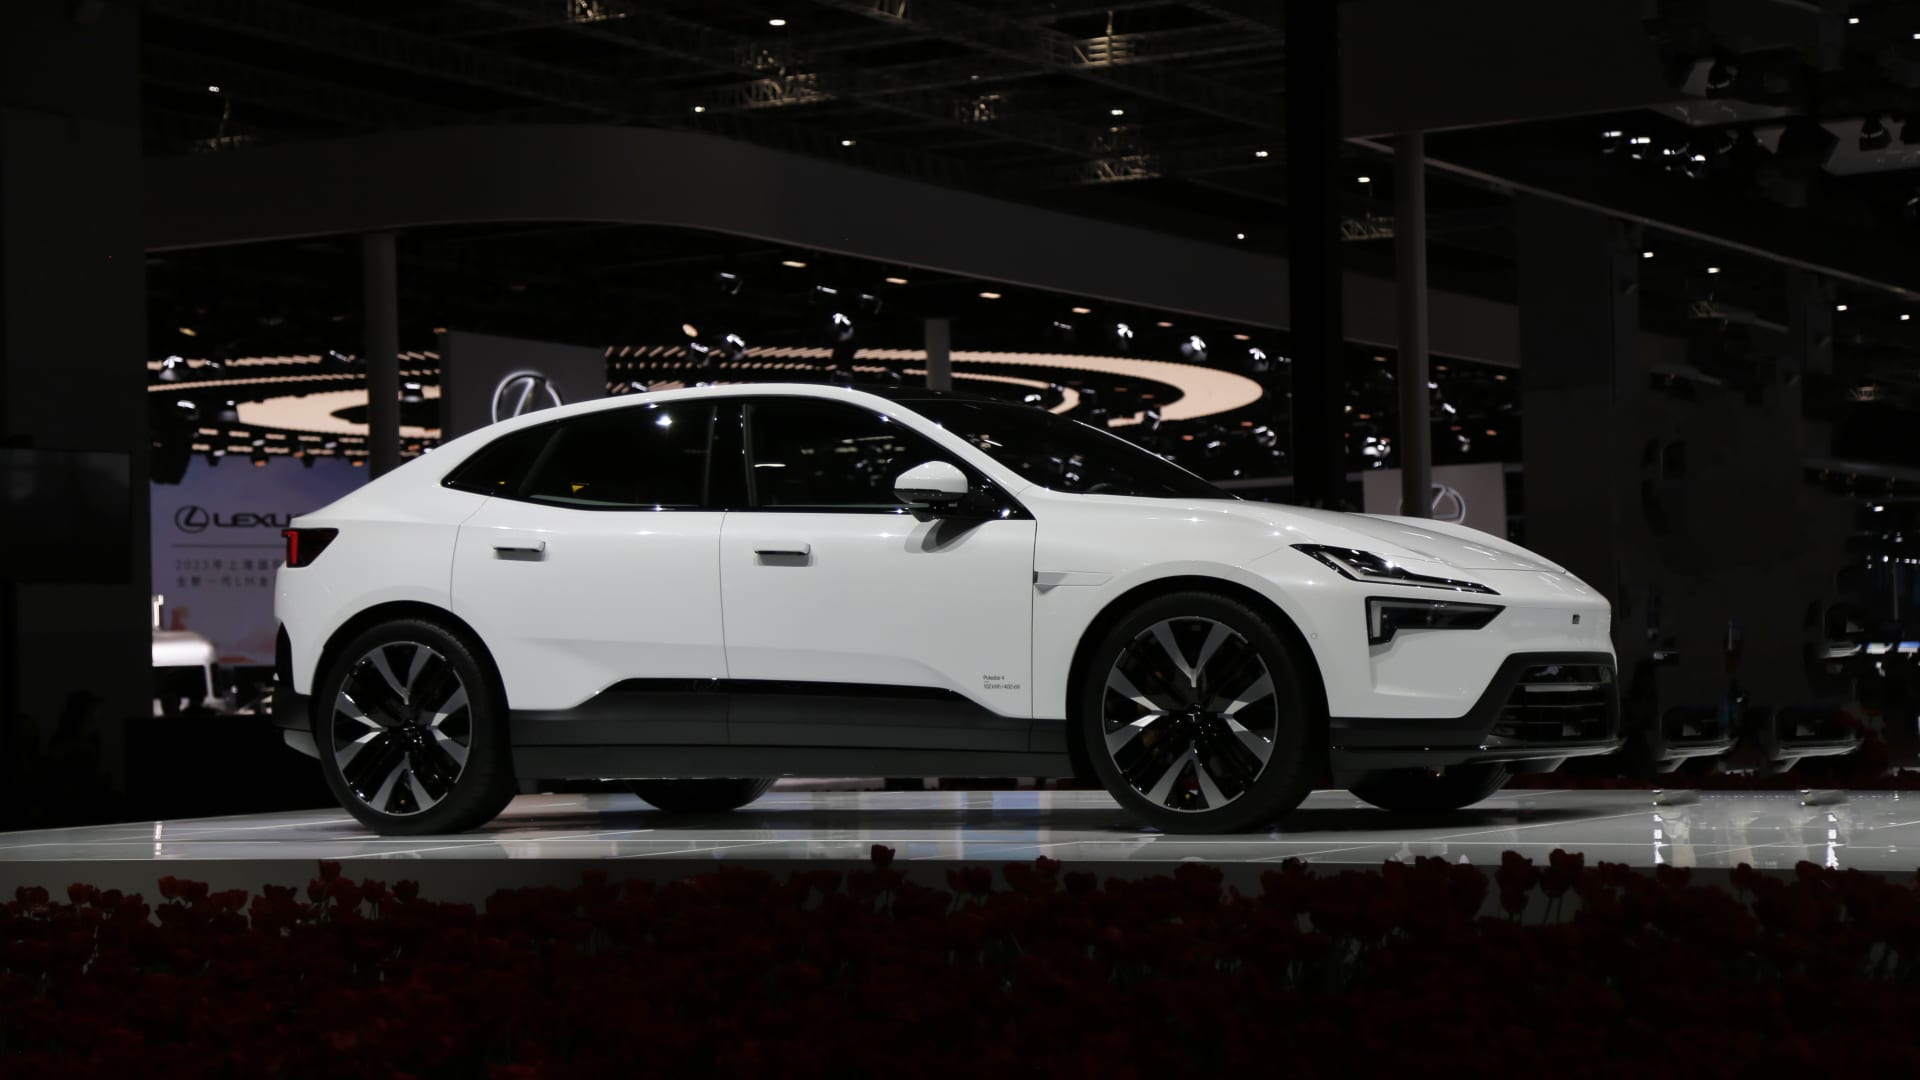 Tesla rival Polestar plans own smartphone launch alongside its first electric SUV in China